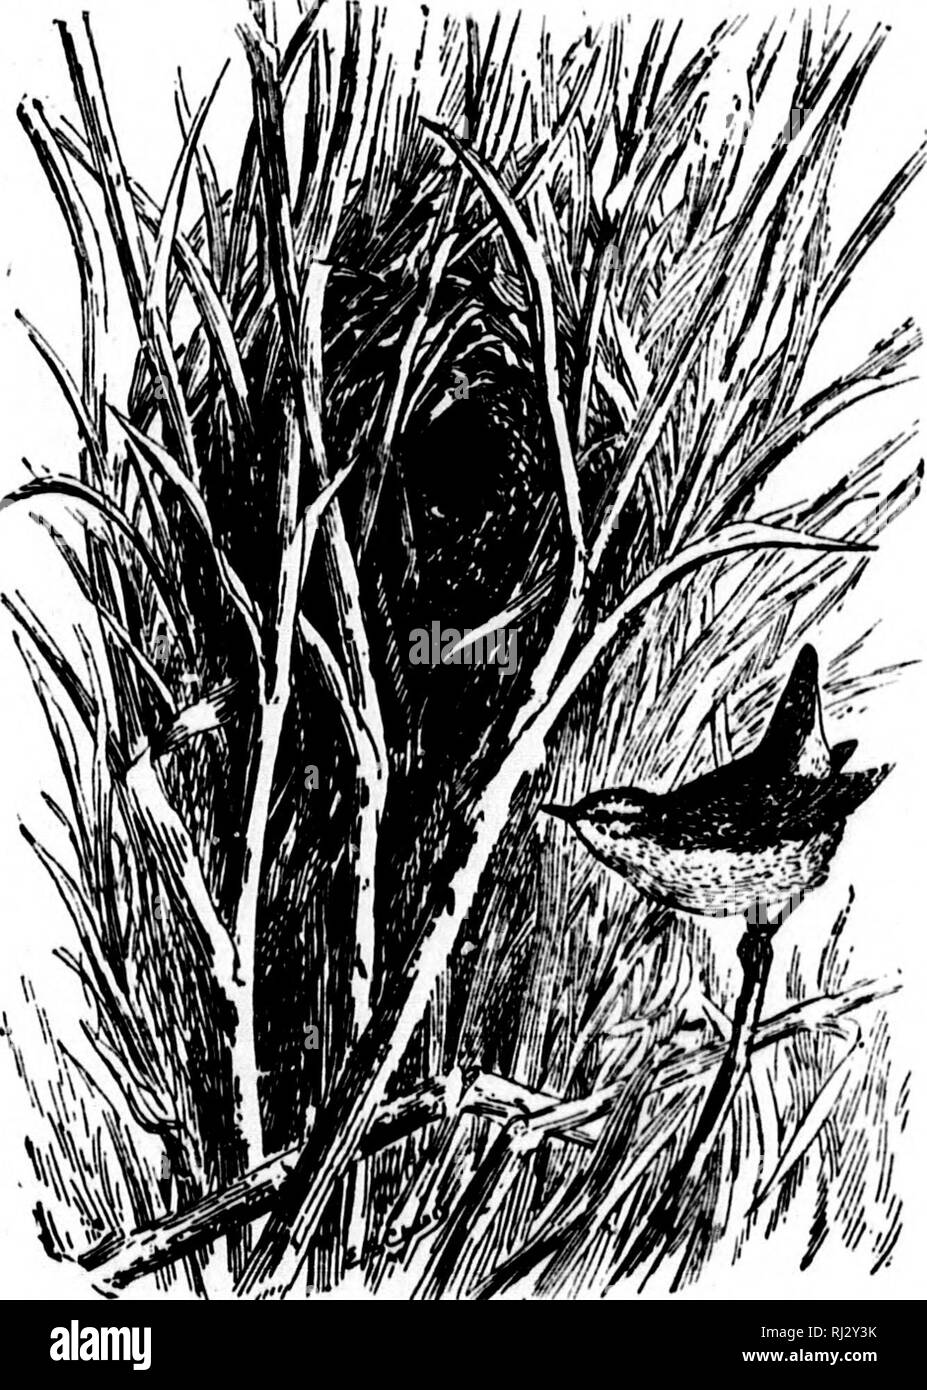 . Nests and eggs of North American birds [microform]. Ornithology; Birds; Ornithologie; Oiseaux. 722a. WESTERN WINTER WREN. Troglndytrs hinnalis paciftcus Balrd. Geog. DIst.—Pacific coast region from Sitka to Southern California; south in winter to Western Mexico; east to Eastern Oregon, Nevada, etc. This subspecies breeds from the southern coast ranges of California north to Sitka. Habits, nesting and eggs like those of T. hicmaUs of the East. Eggs .60x.48. 723. ALASKAN WREN. Troglodyten alnscensls Balrd. Geog. DIst.—Aleutian and Prlbilof Islands, Alaska. &quot;In a small collection of birds' Stock Photo